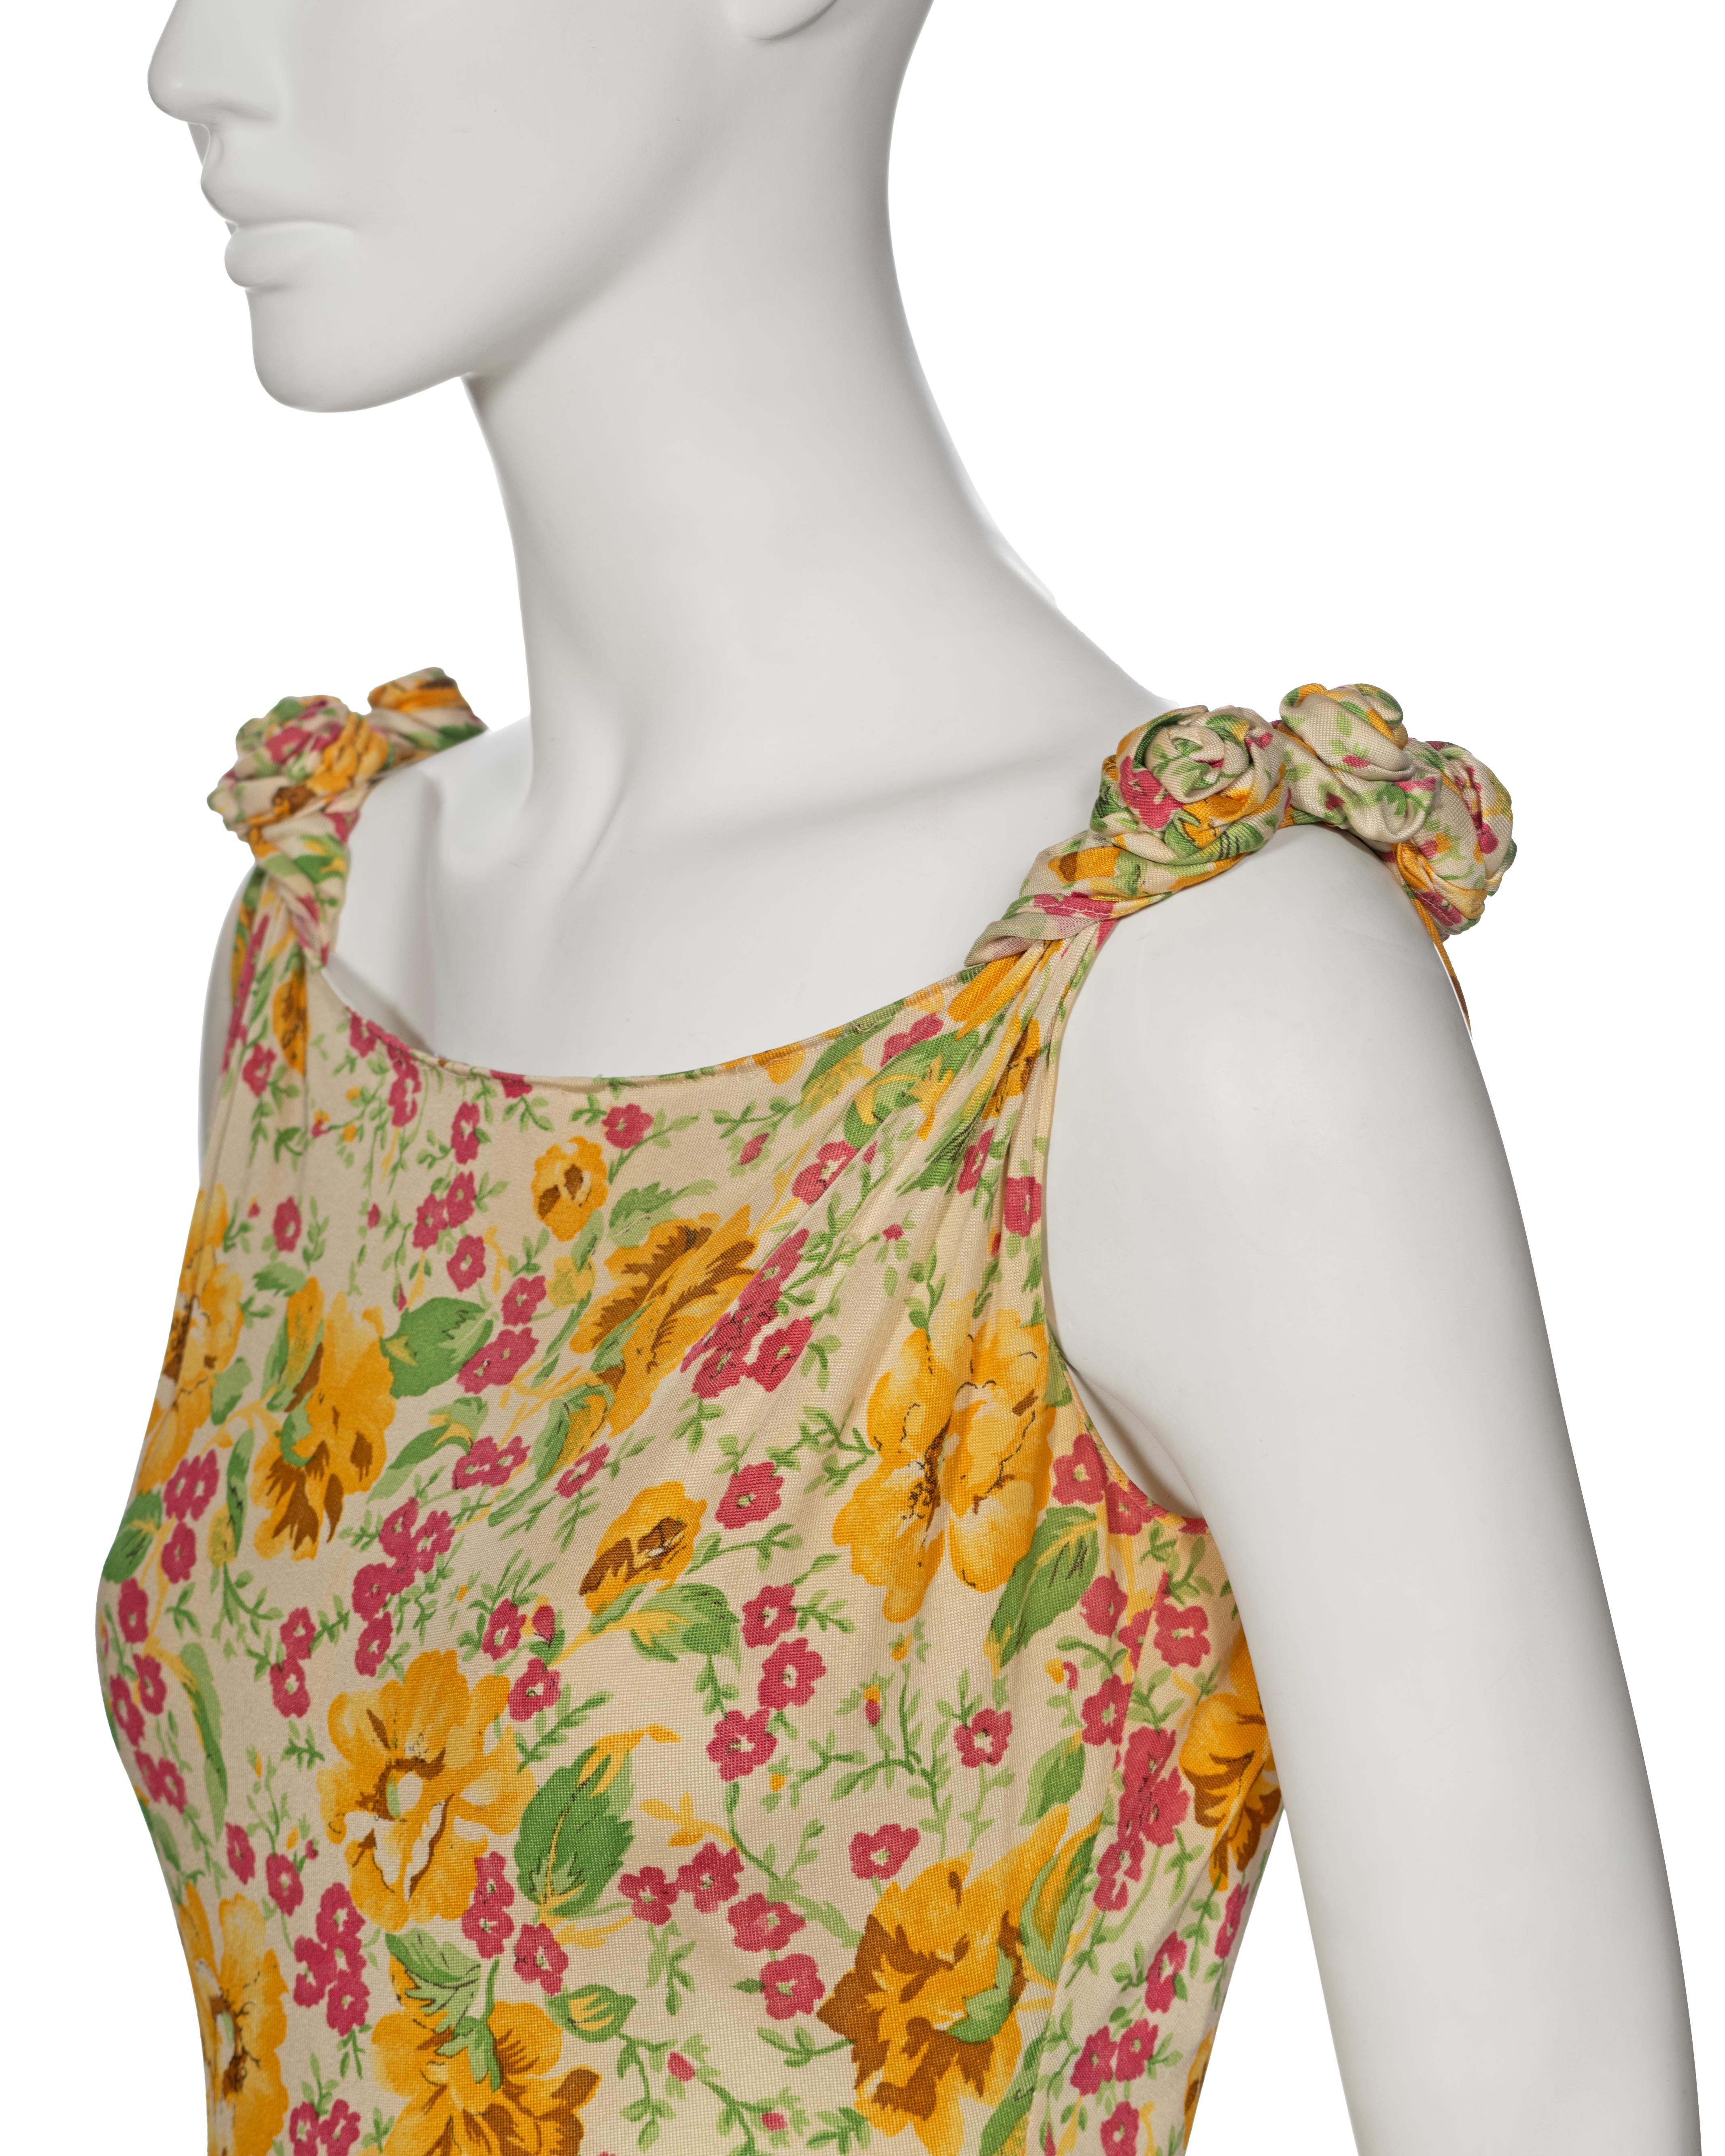 Christian Dior by John Galliano Floral Silk Jersey Cocktail Dress, ss 2000 10